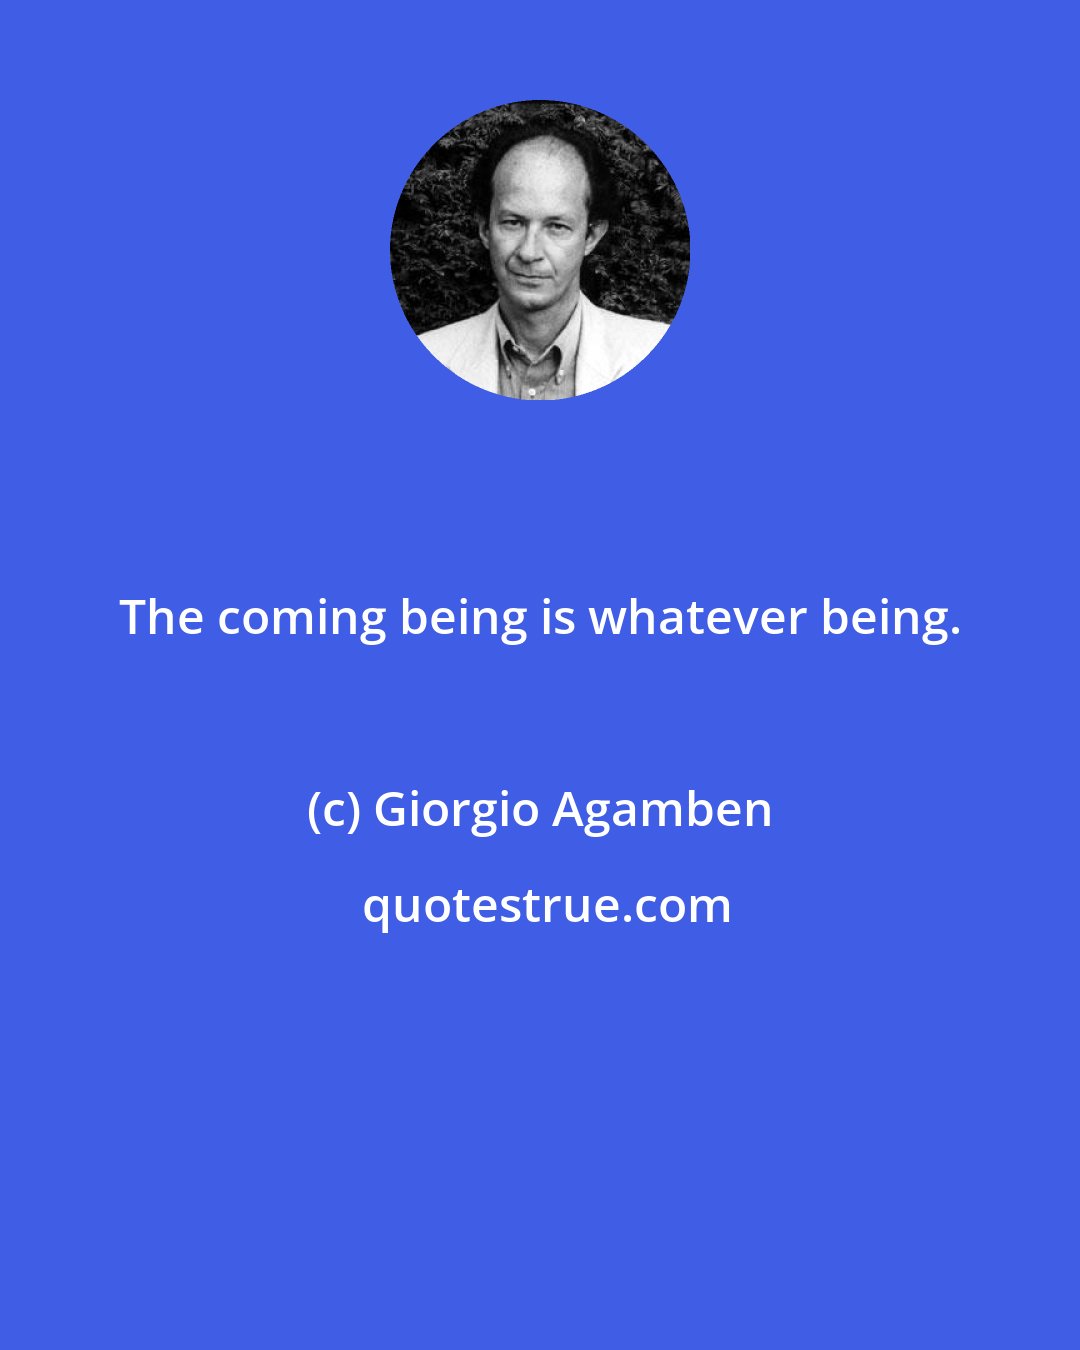 Giorgio Agamben: The coming being is whatever being.